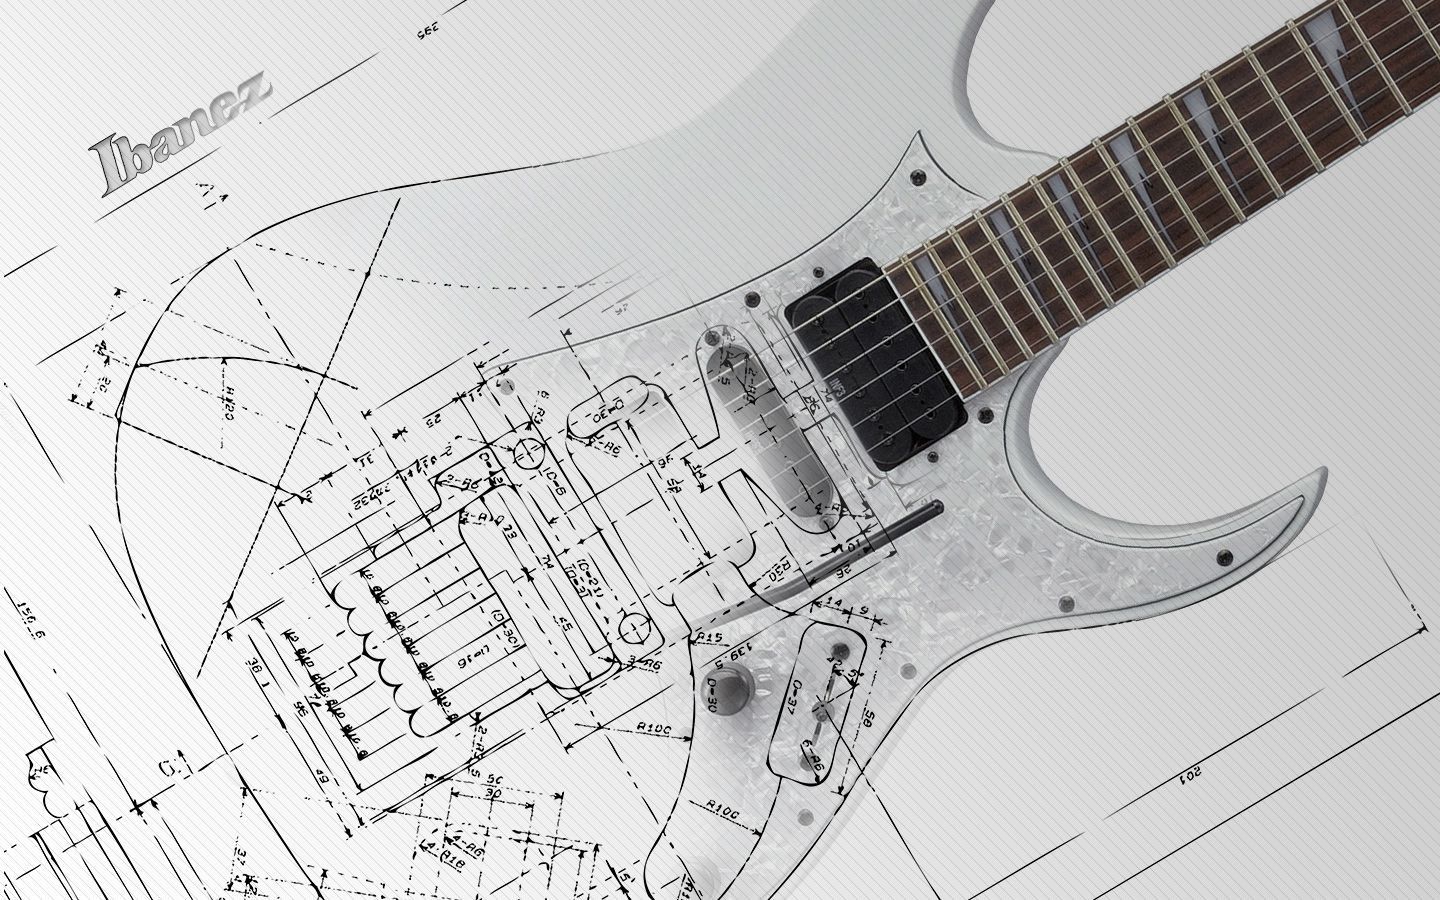 Guitar Ibanez White Hd Wallpaper Background | Best HD Wallpapers